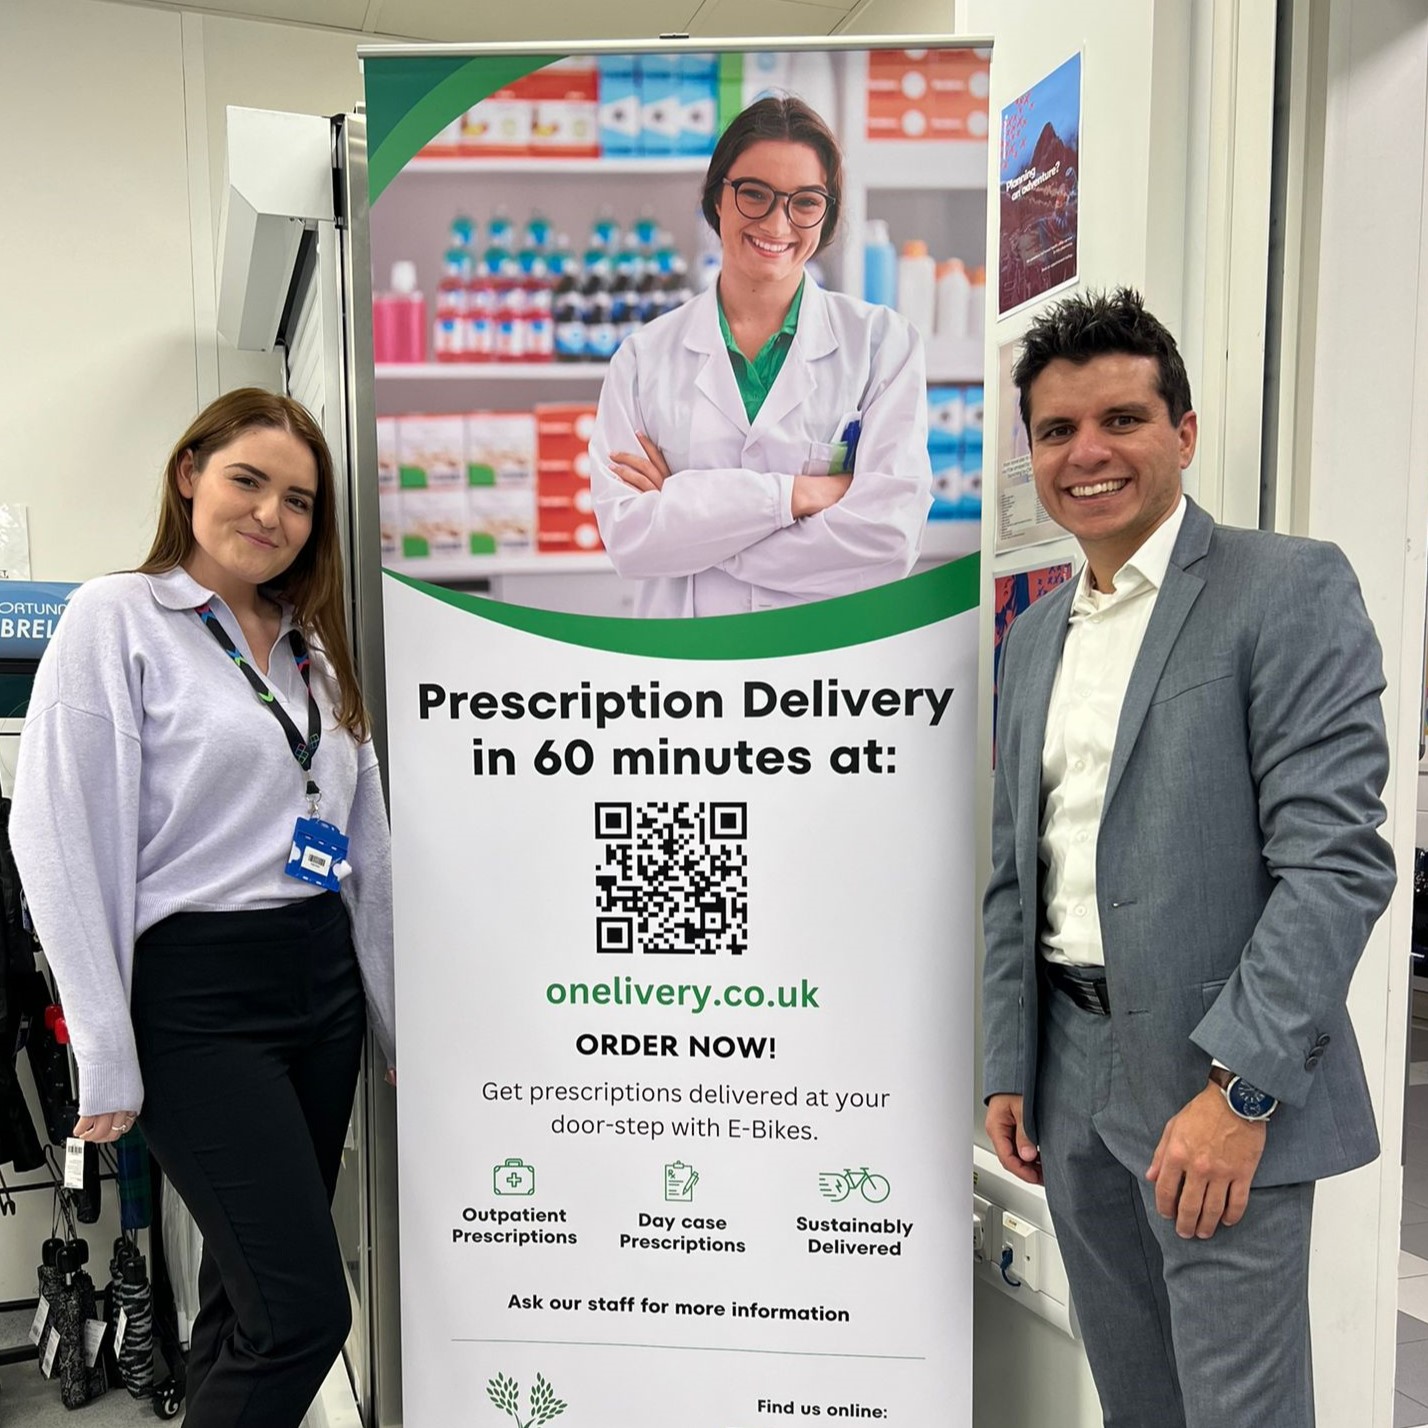 Same day Medicine Delivery: CW Medicines partnership with Onelivery UK to provide Sustainable Medicine delivery in London.